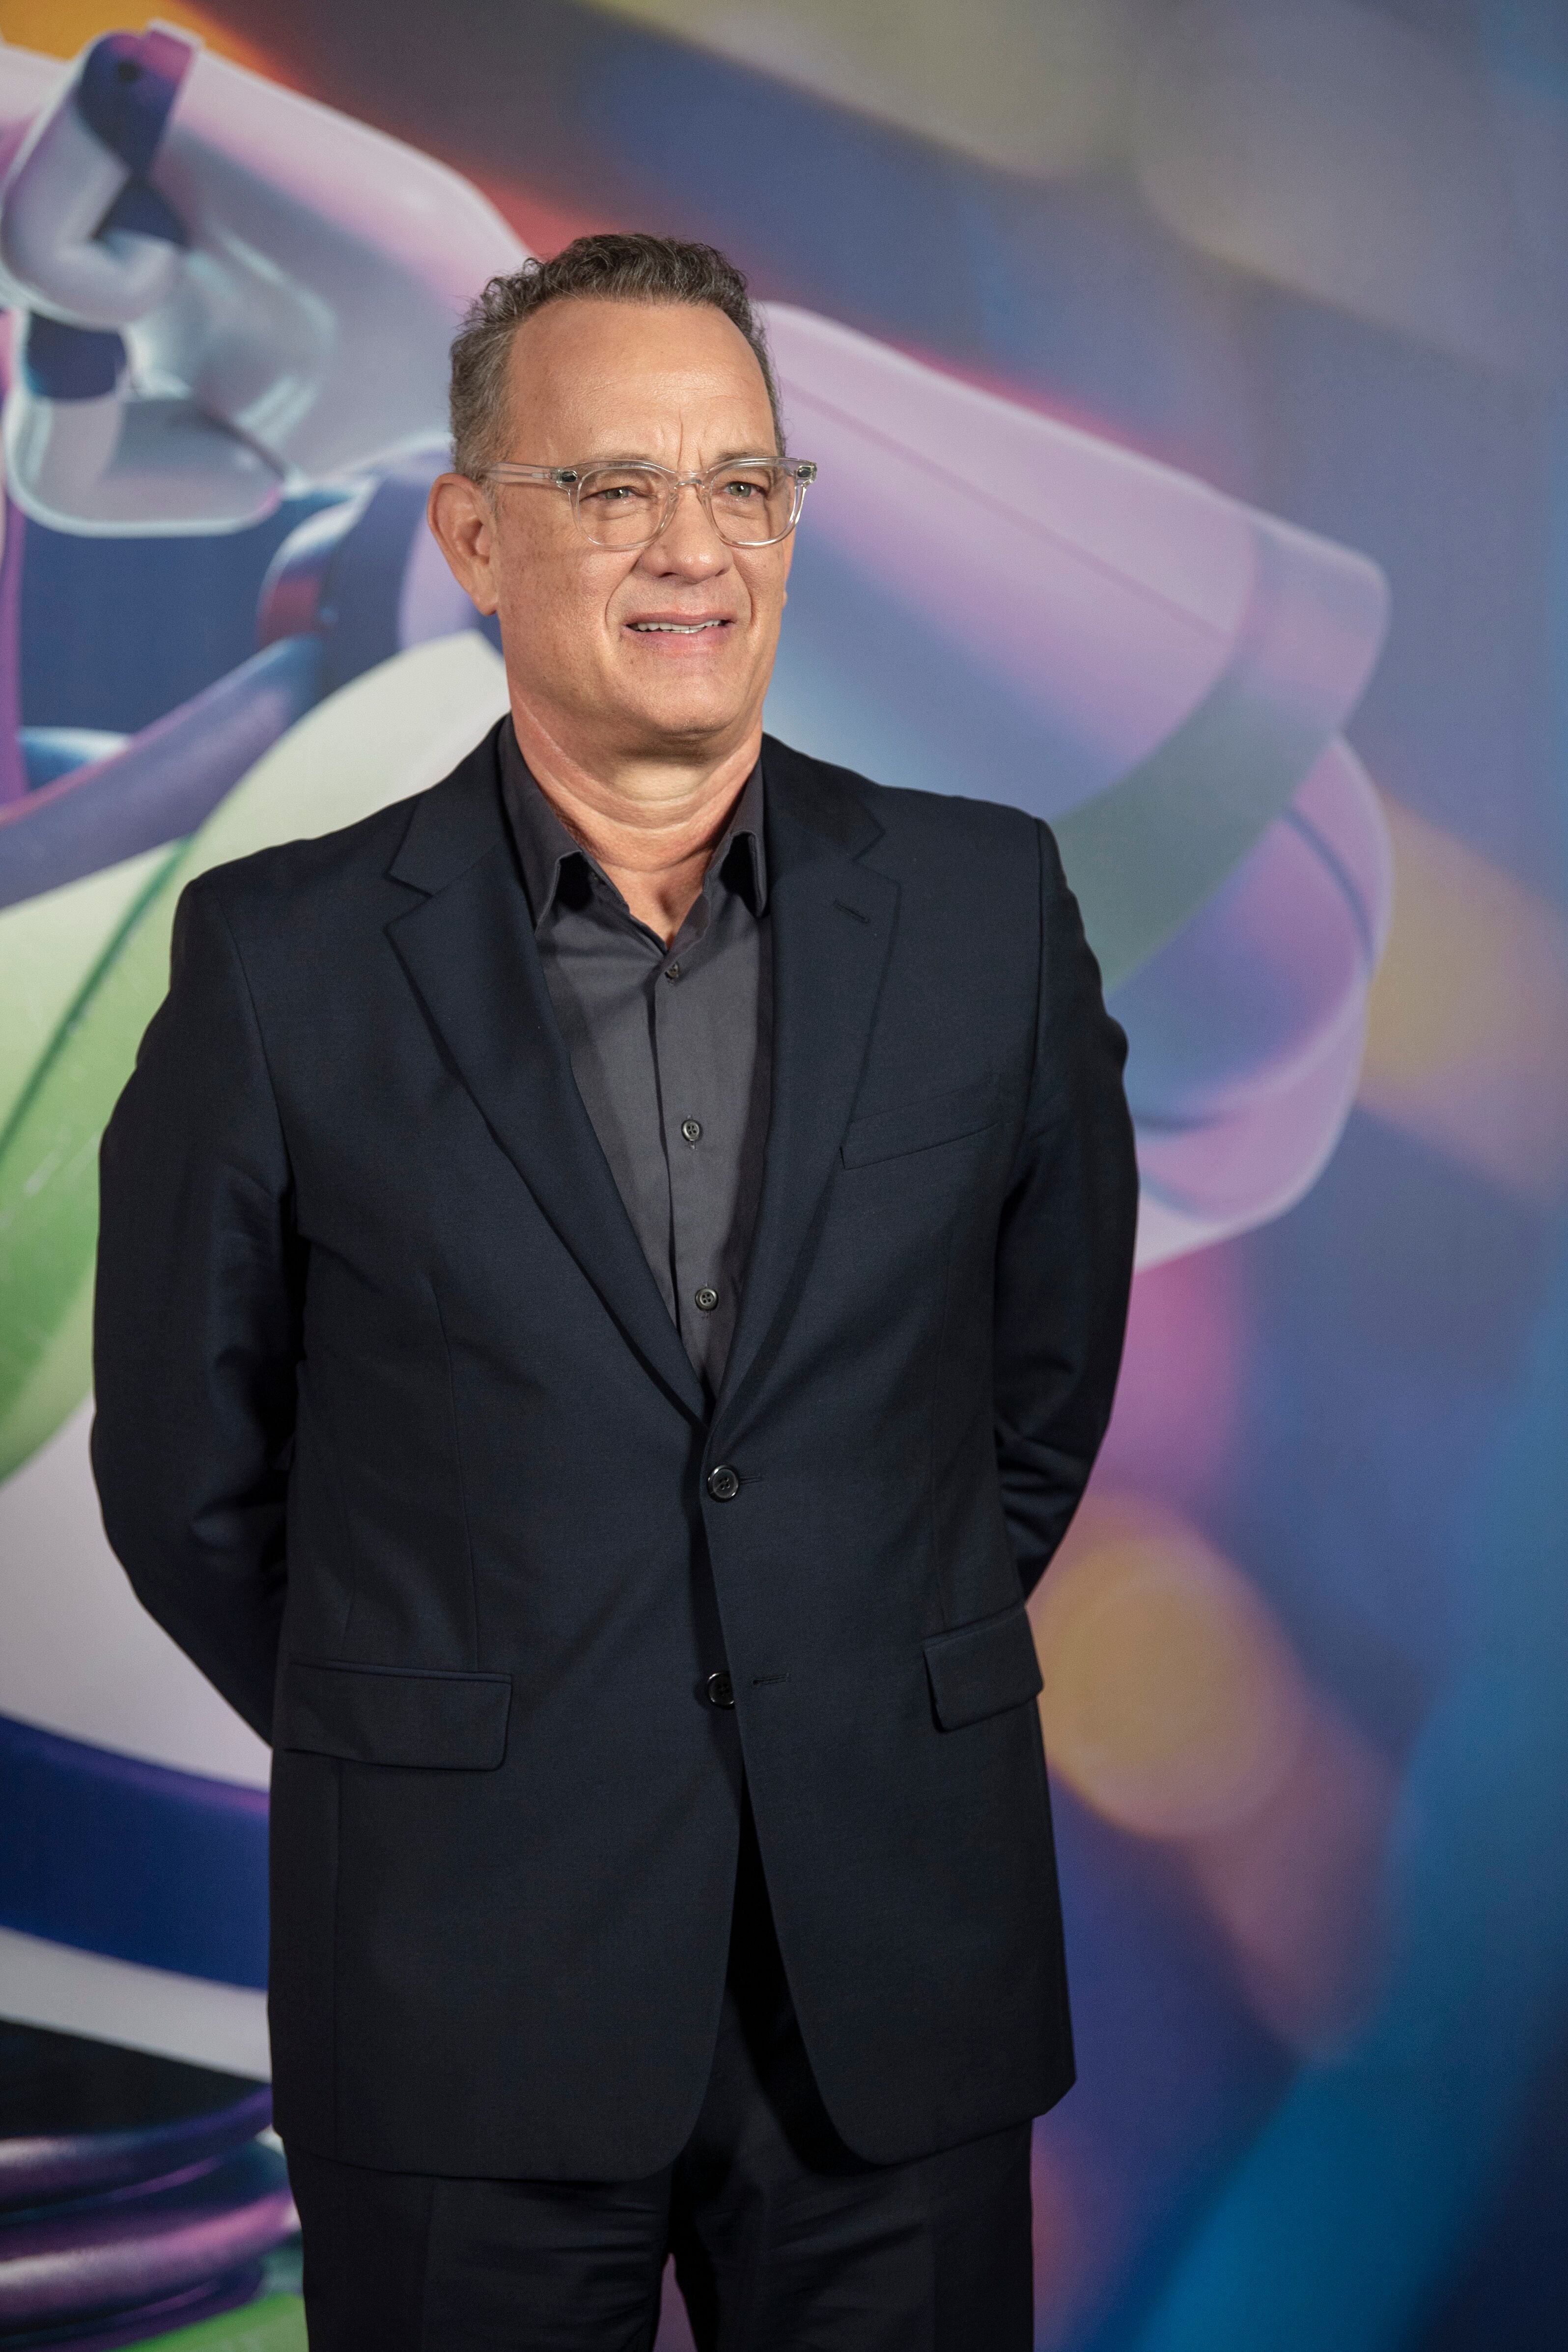 Tom Hanks attends the "Toy Story 4" photocall. | Source: Getty Images